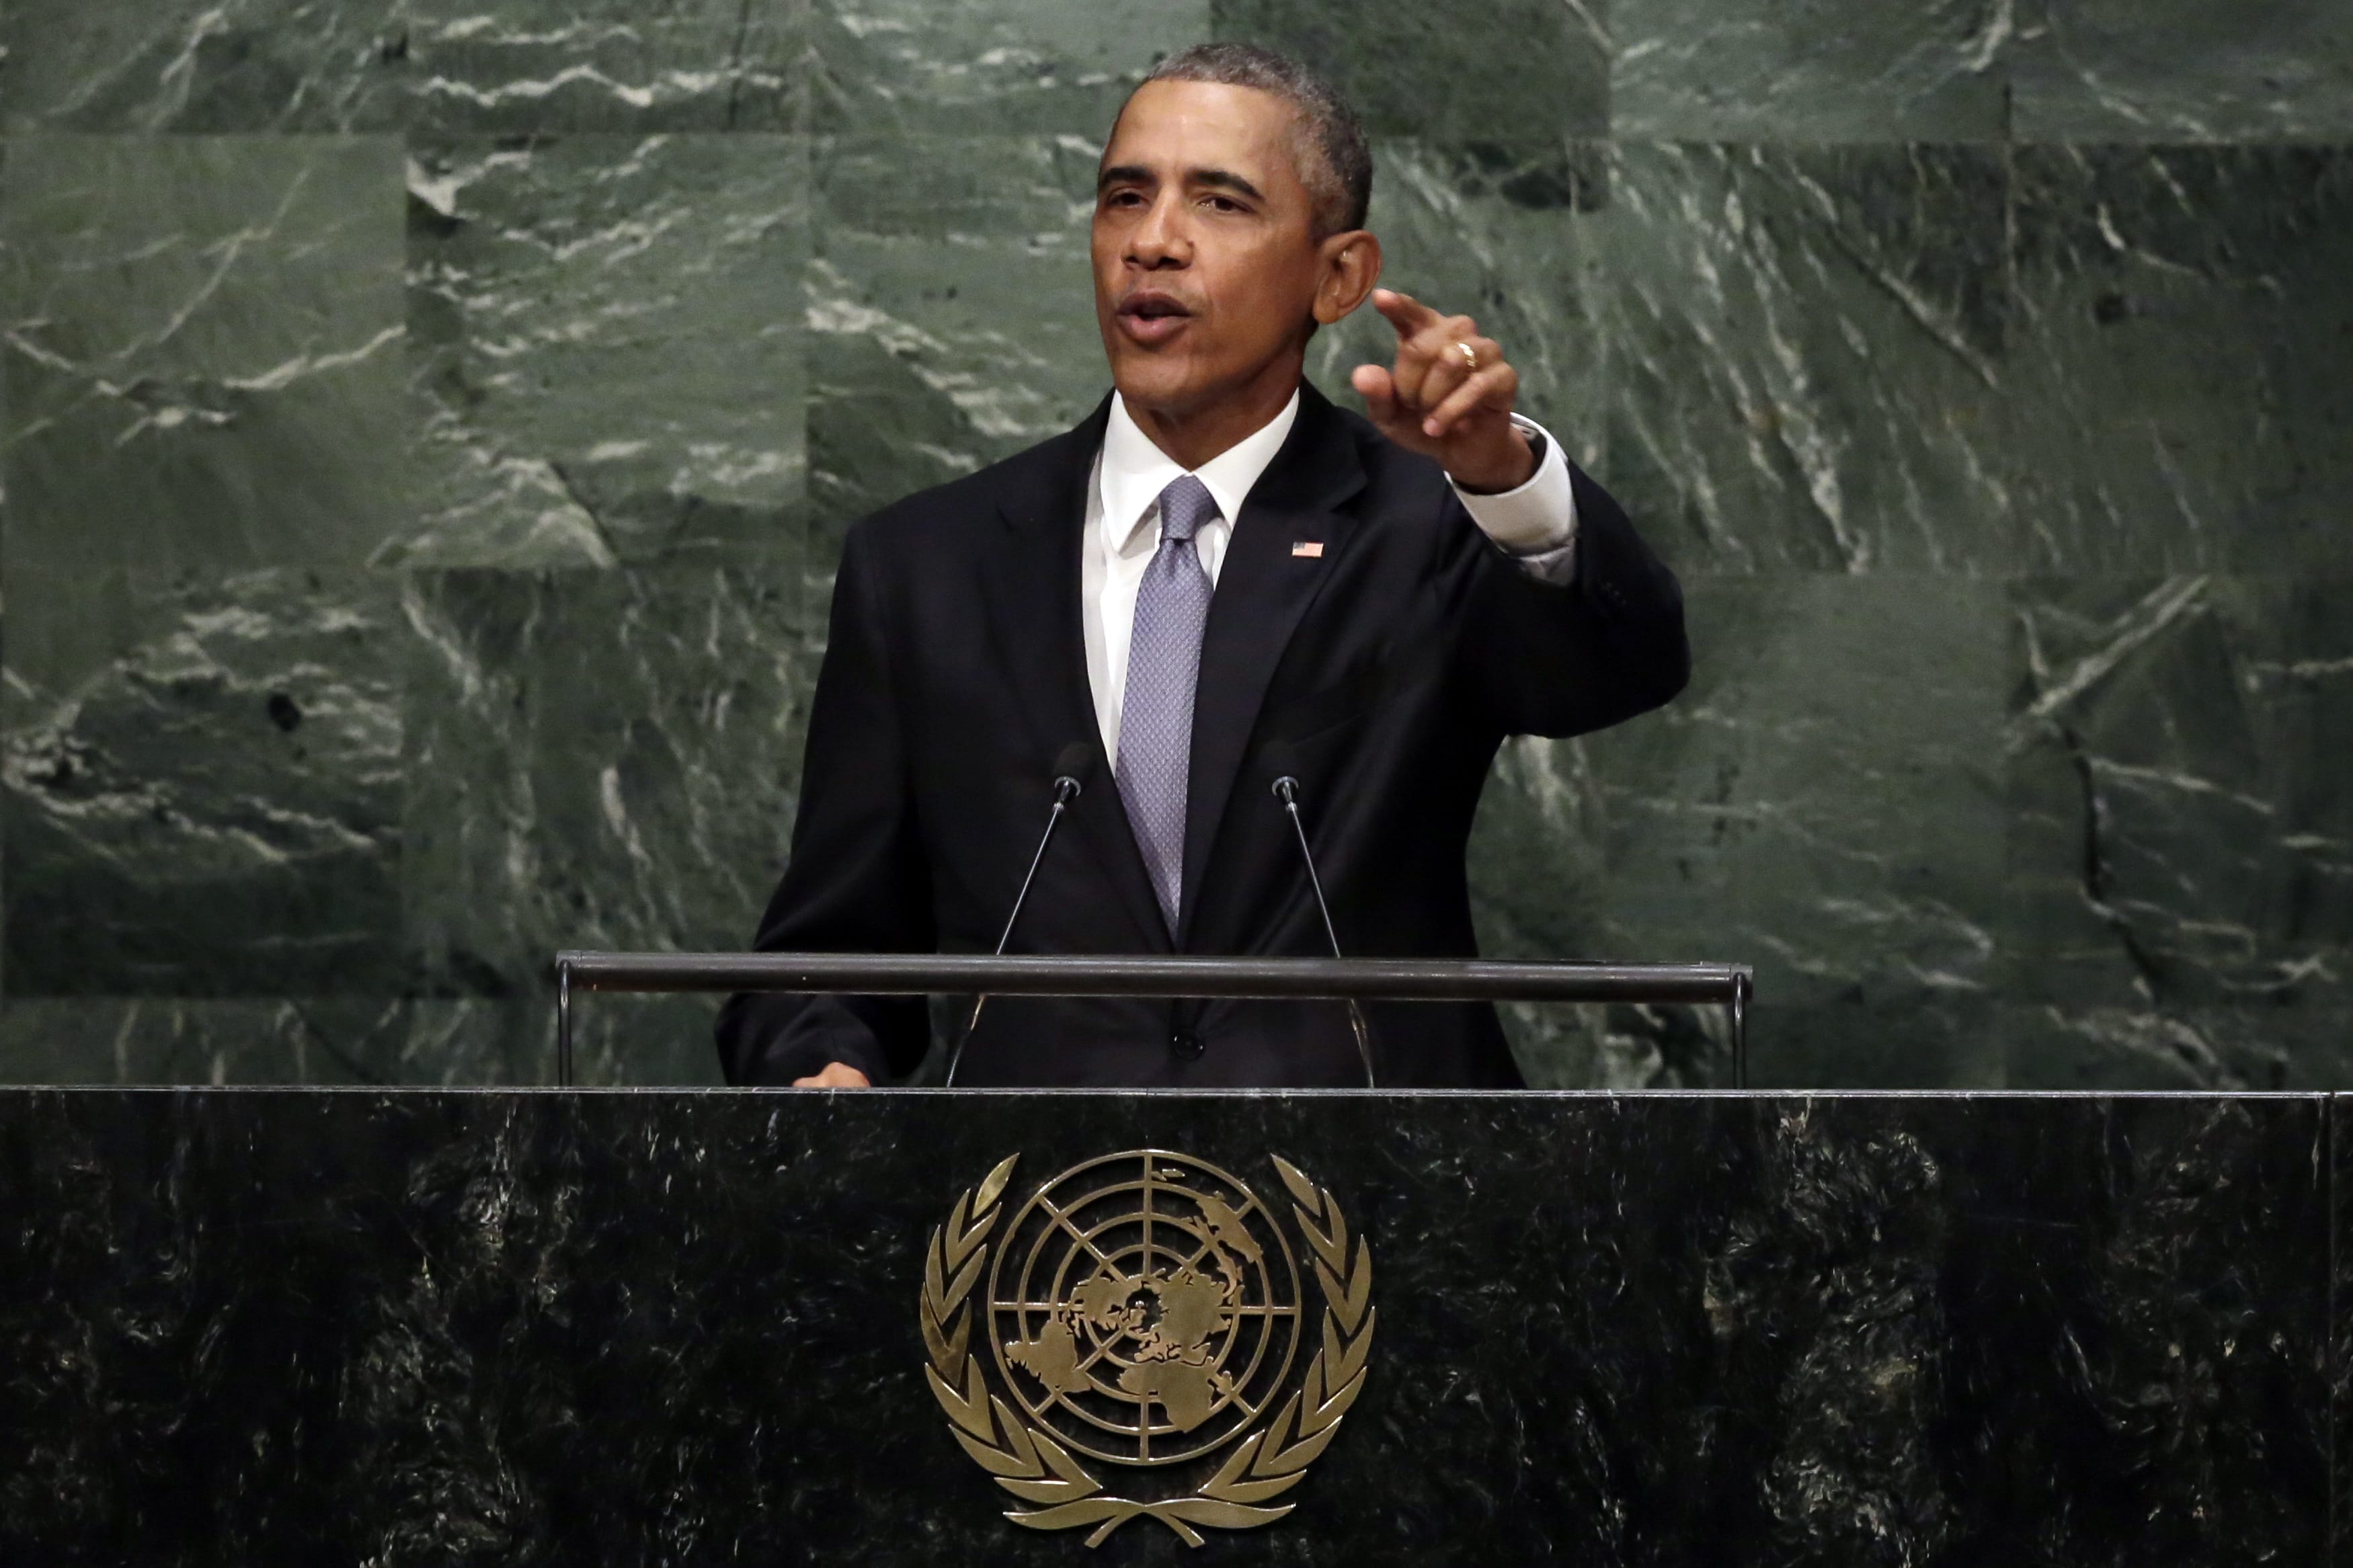 FILE - In this Sept. 28, 2015, file photo, President Barack Obama addresses the 70th session of the United Nations General Assembly. In one of his last major appearances on the world stage, Obama will try to define how his leadership has made the planet safer and more prosperous when he gives his farewell speech to the U.N. General Assembly on Sept. 20, 2016.